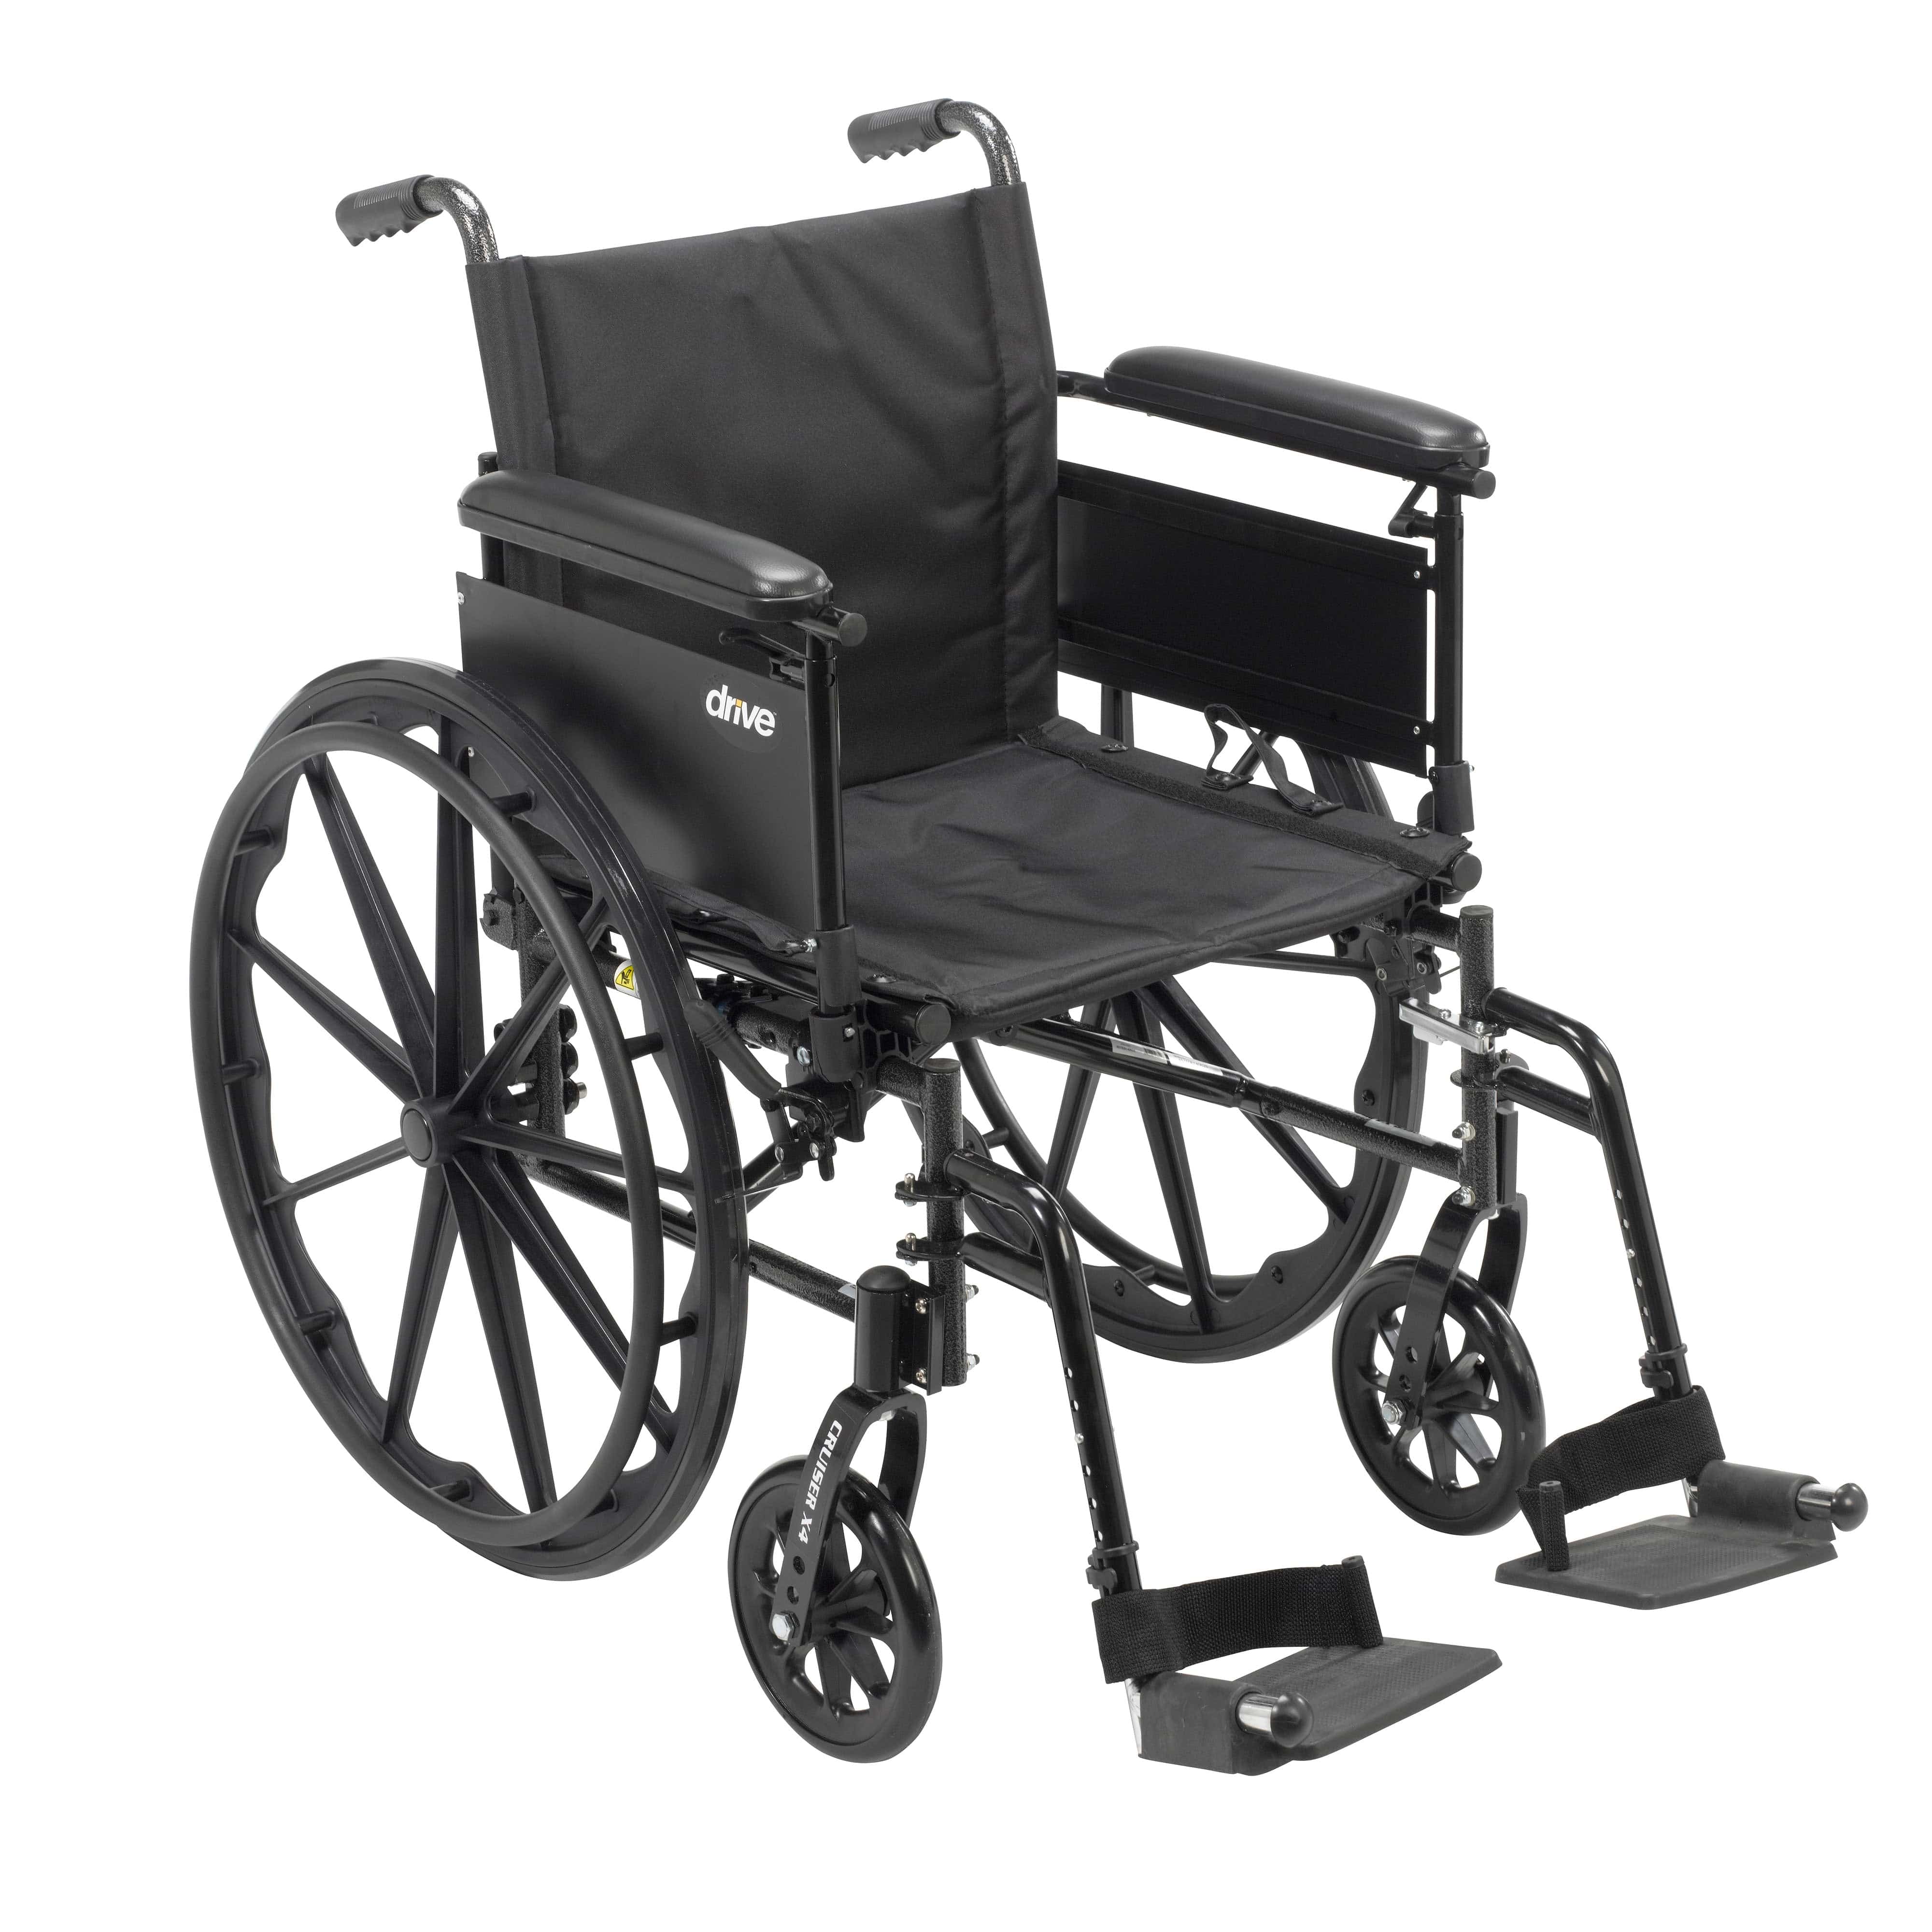 Drive Medical Wheelchairs/Lightweight Wheelchairs Full Arms / Swing Away Footrests / 20" Seat Drive Medical Cruiser X4 Lightweight Dual Axle Wheelchair with Adjustable Detatchable Arms